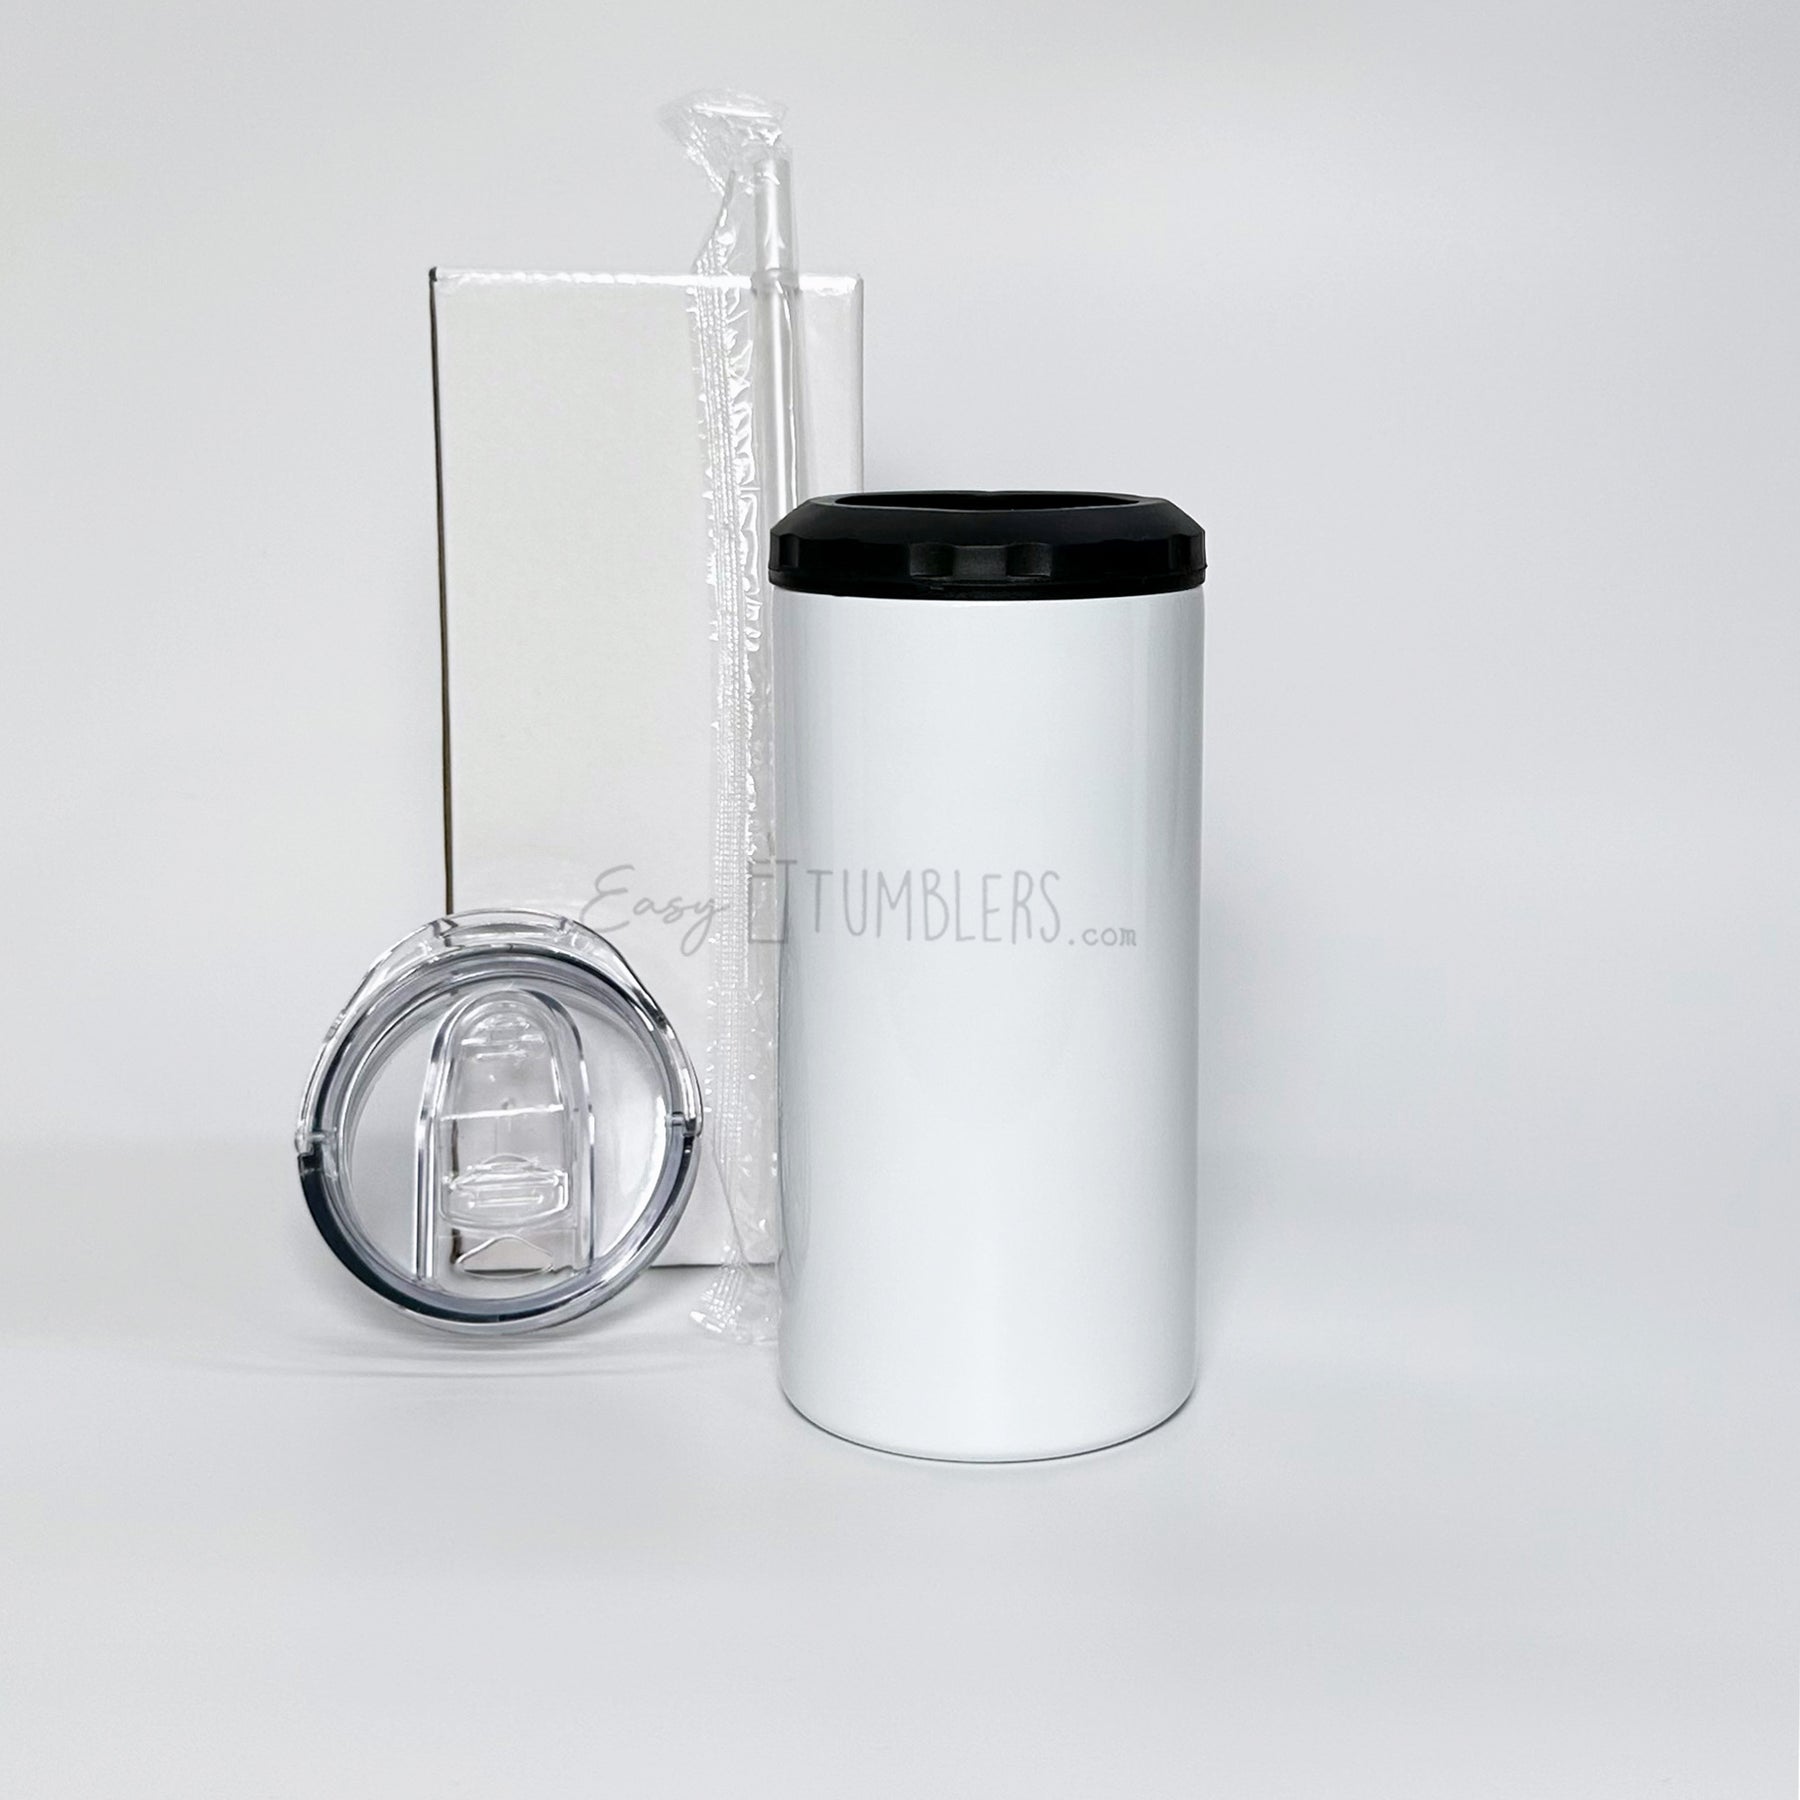 Plain Tumbler Water Glass Stainless Steel Blank Stainless Steel